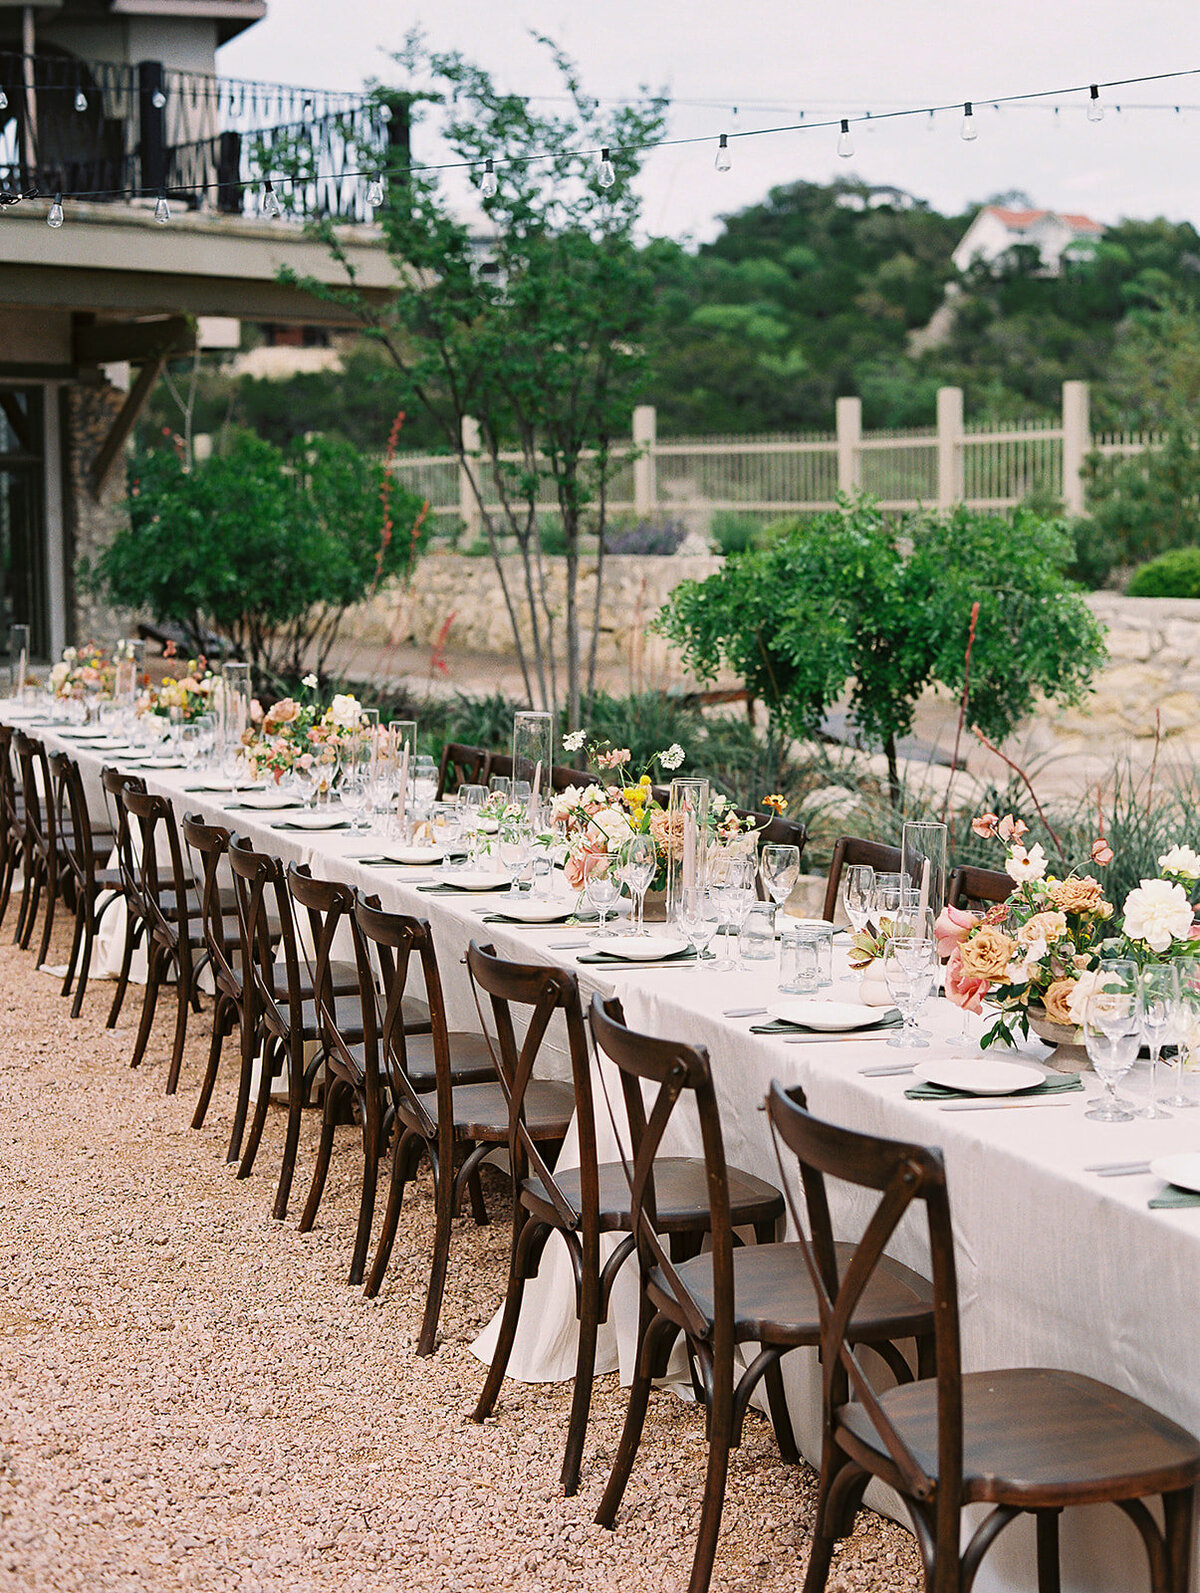 A long table is ready for guests to be seated in the Butterfly Gardens at Villa Antonia